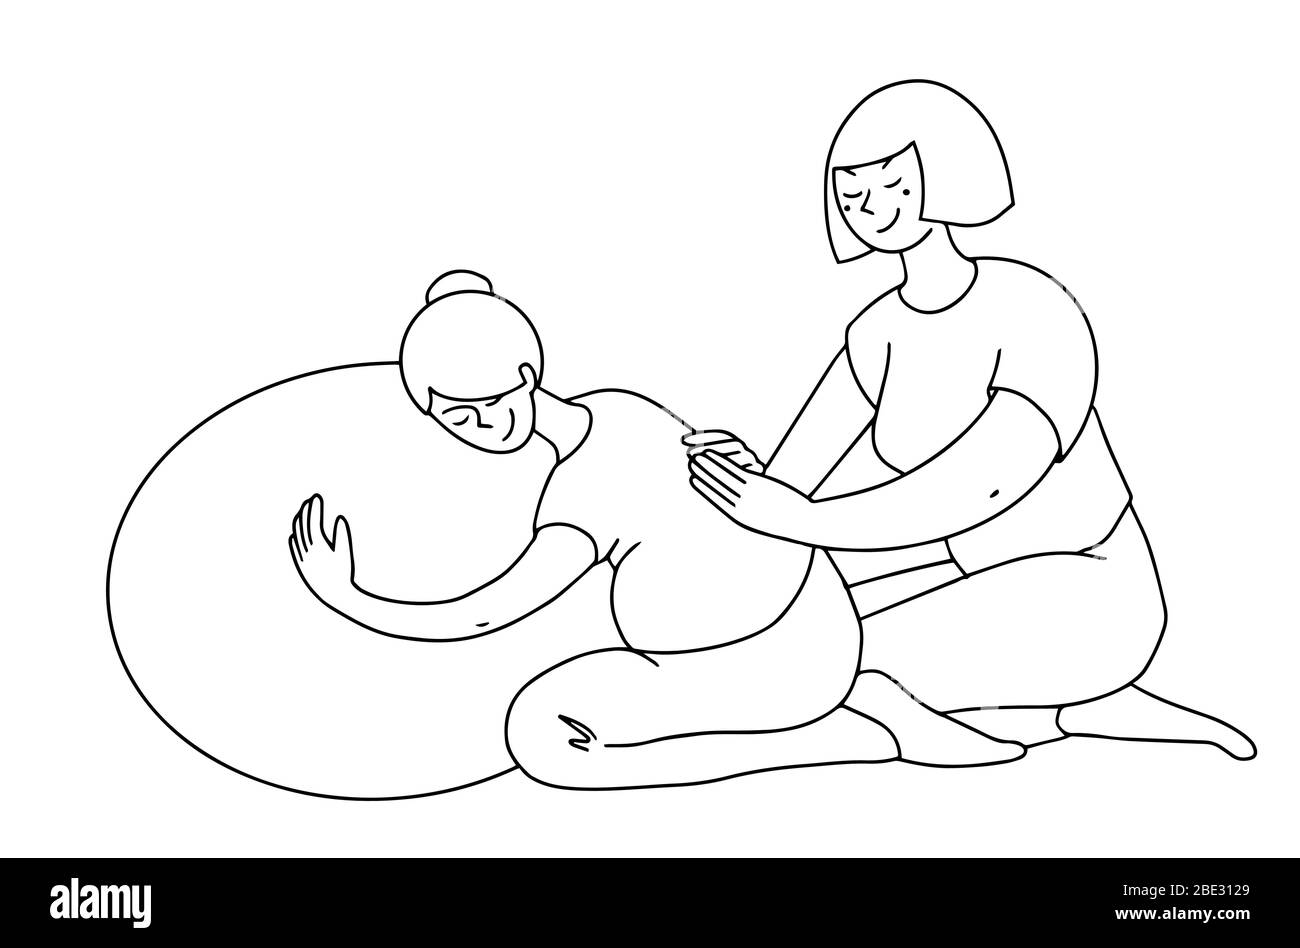 Doula support instead partner pregnant woman. help physical and emotional labour and birth to go smoothly. black and white vector line style illustration Stock Vector